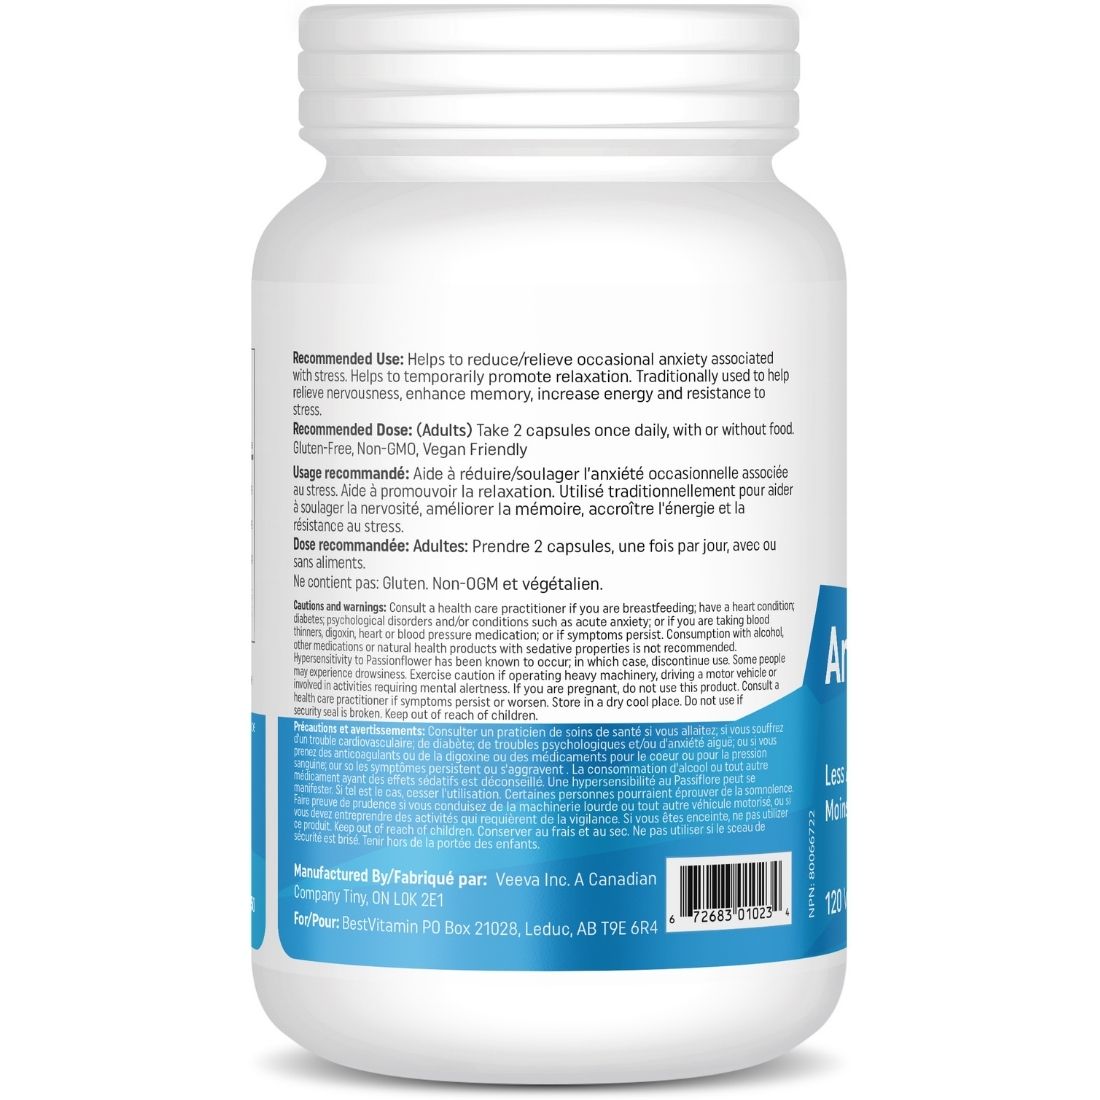 BestVitamin Anxiety Formula, Less Anxiety in 15 Days Guaranteed, 120 Capsules, 50% Off Final Sale, Expiry 06/24